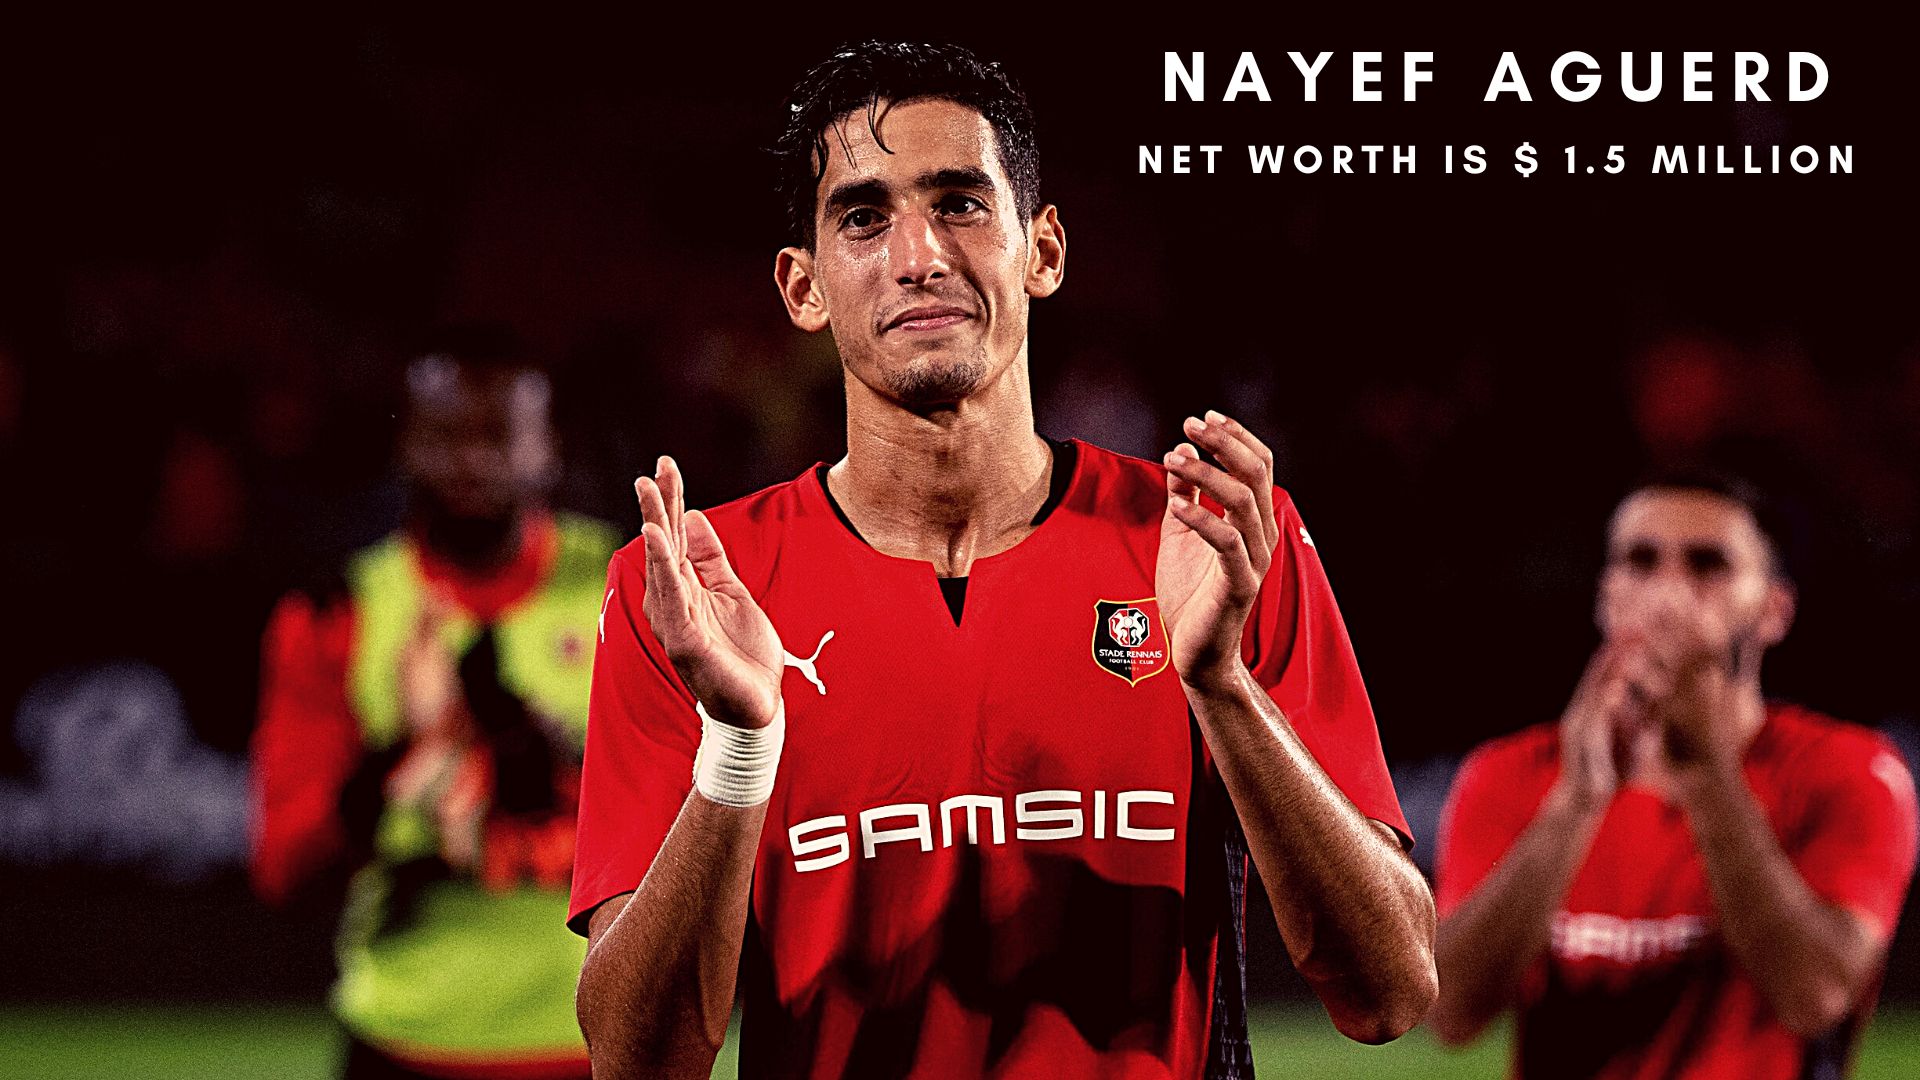 Nayef Aguerd 2022 - Net Worth, Salary, Sponsors, Wife, Tattoos, Cars, and more